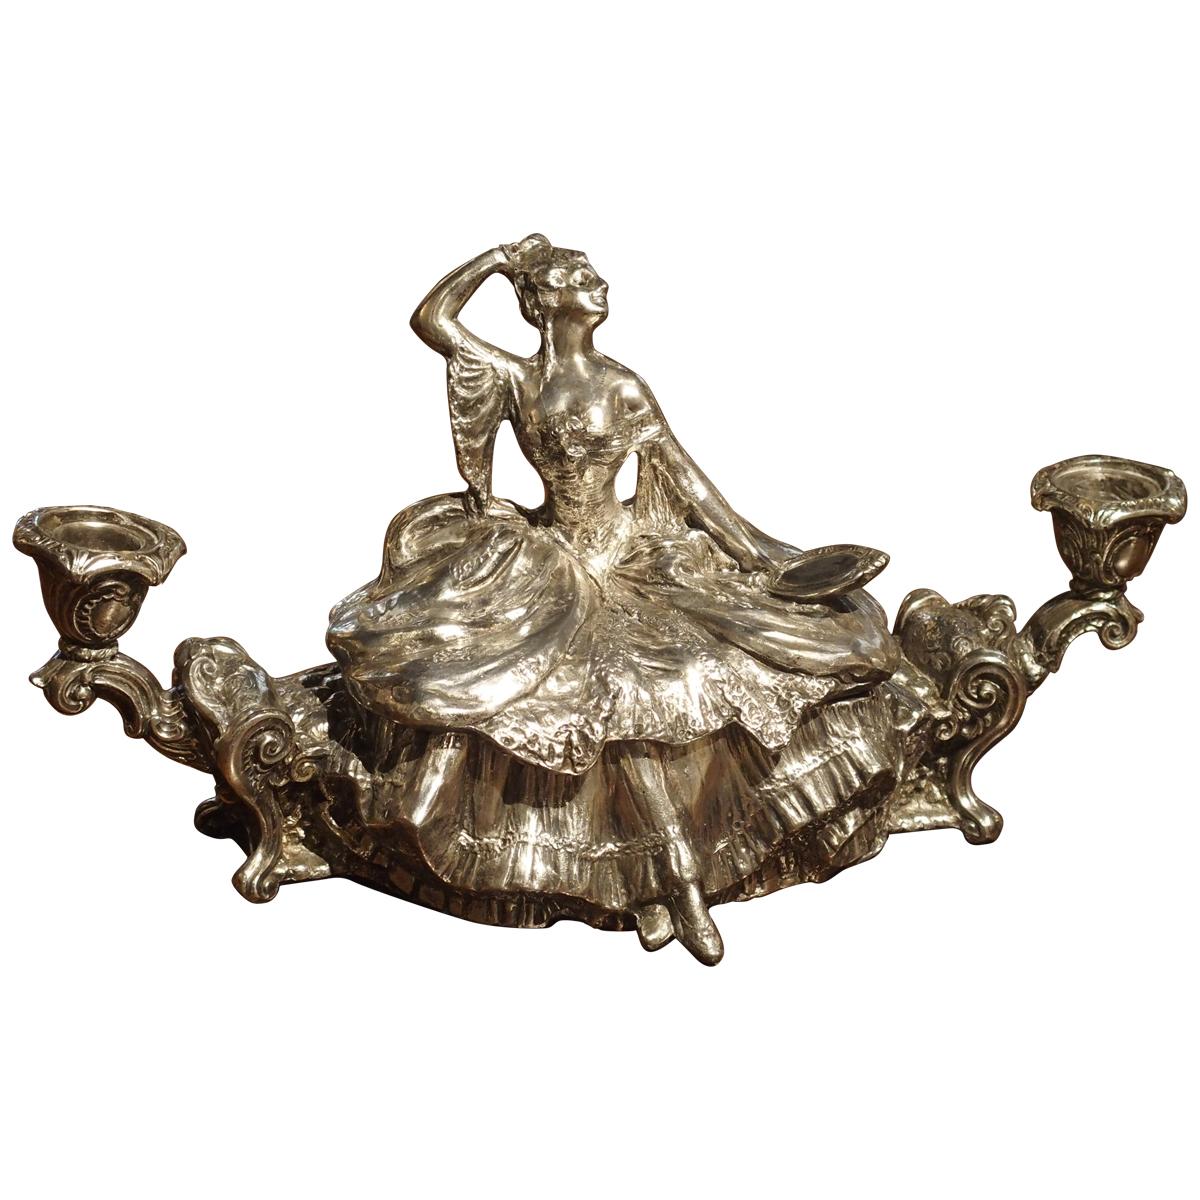 Antique Silvered Figural Jewelry or Table Box with Candleholders